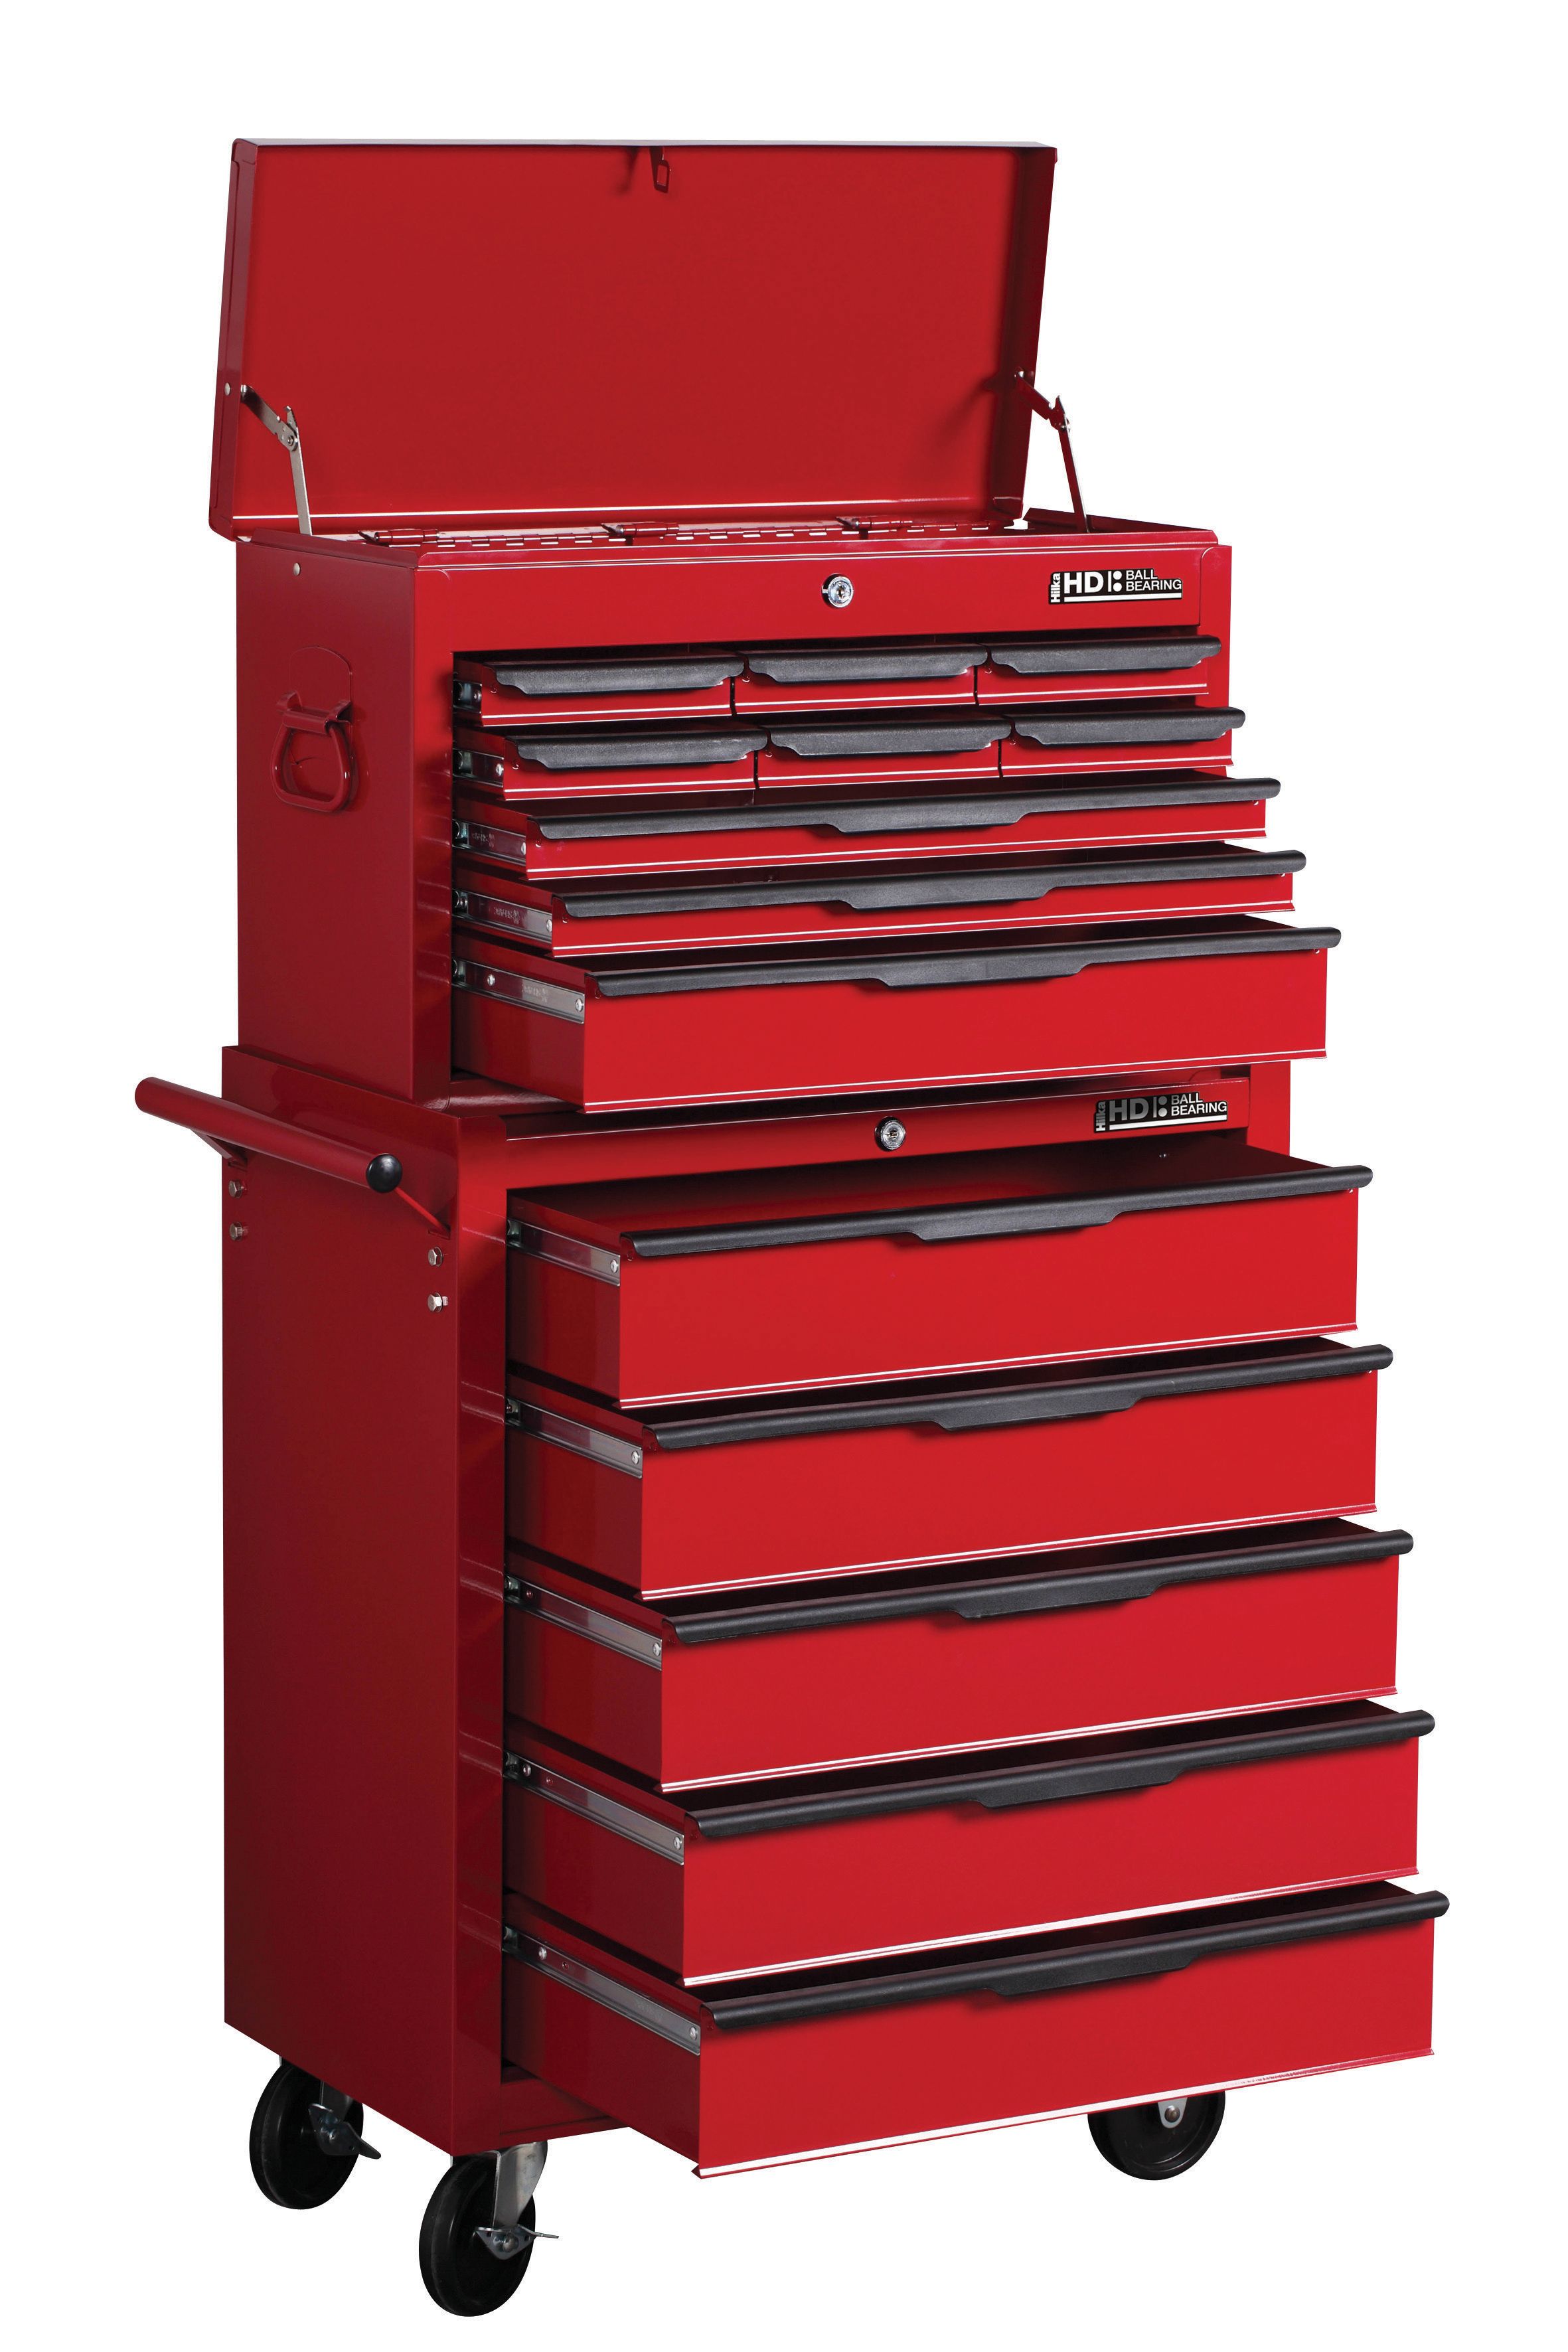 Hilka Heavy Duty Tool Chest and Cabinet with 271 Piece Mechanics Tool Kit - Red